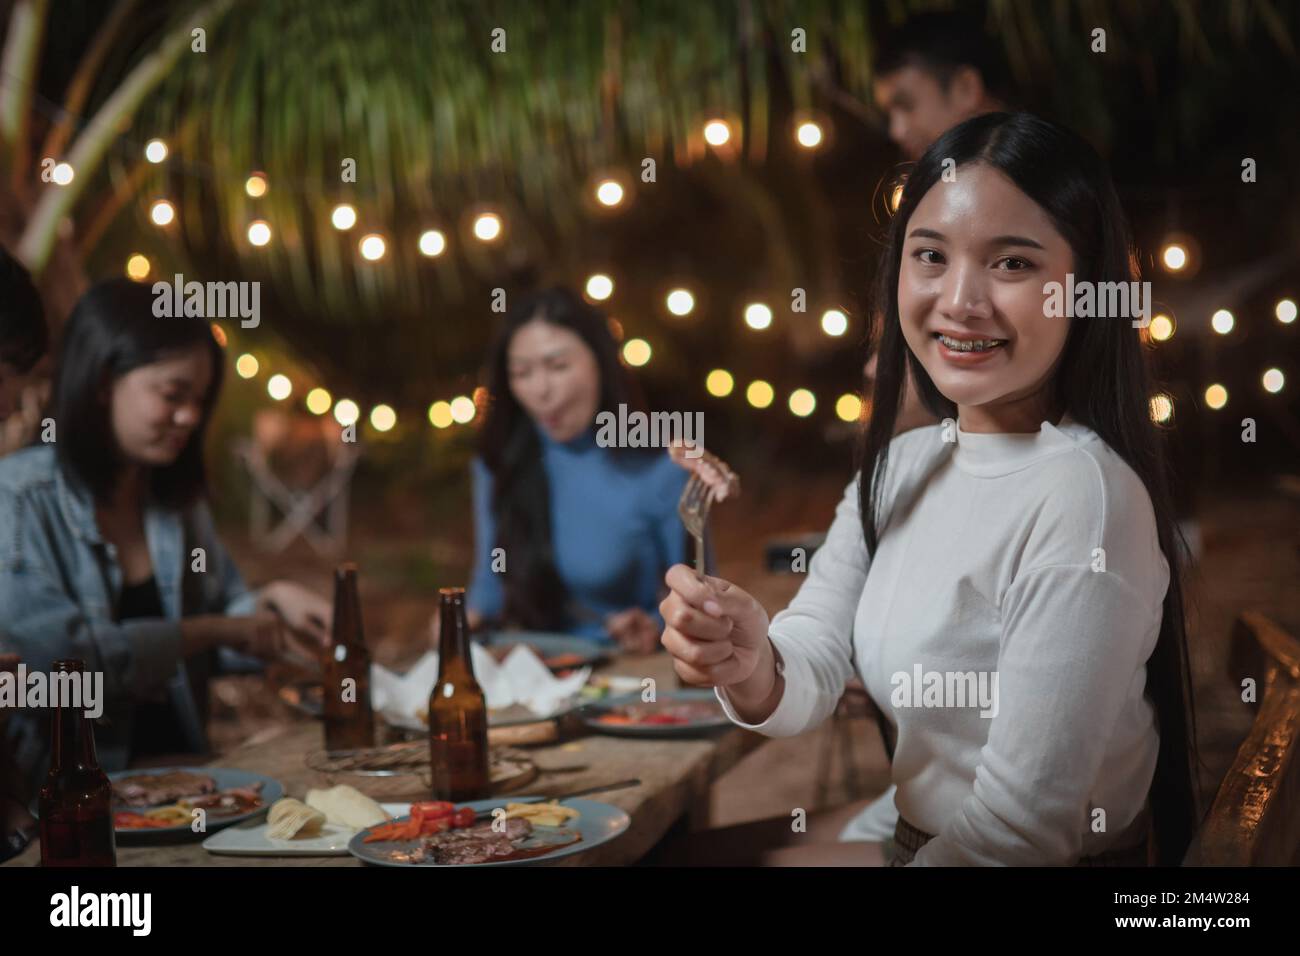 Asian young woman showing off eating steak at a party Stock Photo